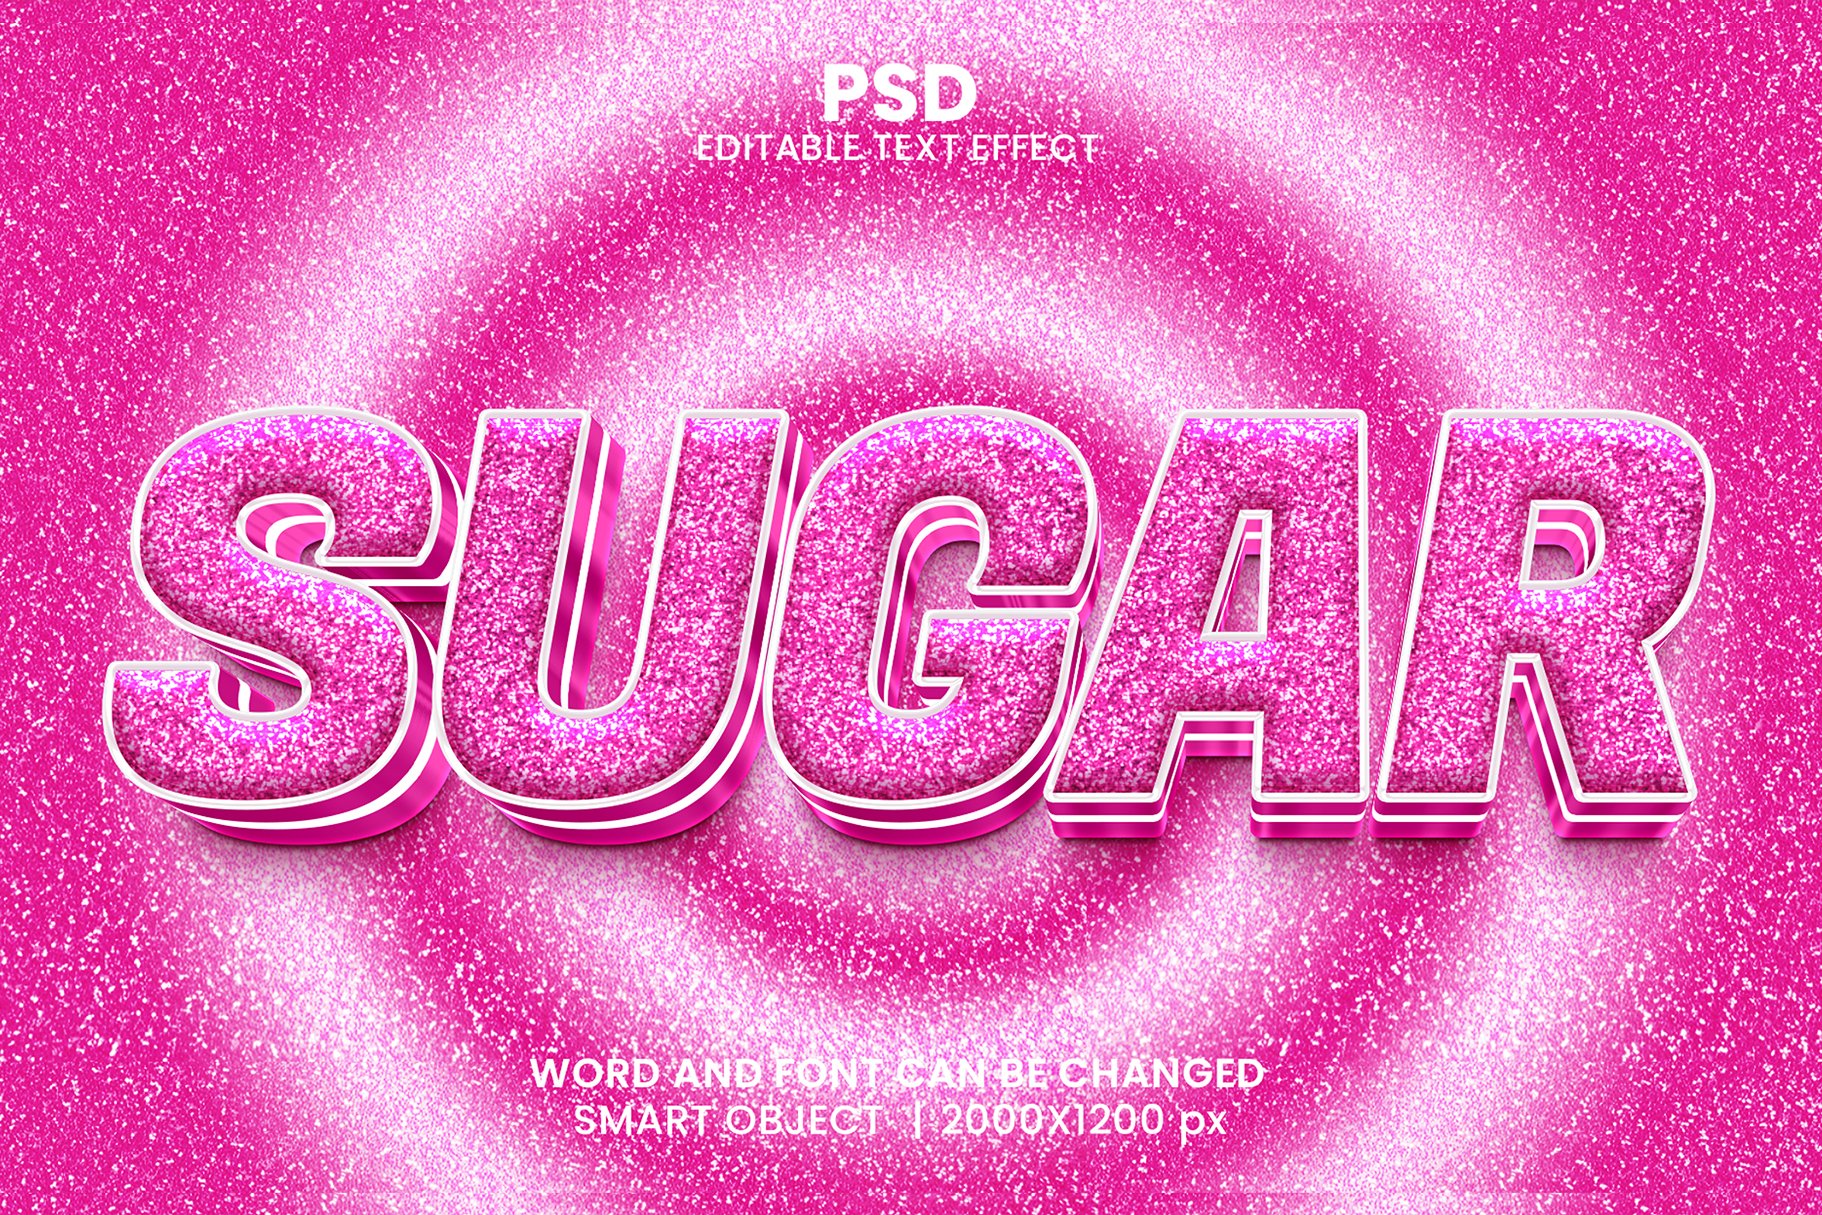 Sugar 3D Text Effect for photoshopcover image.